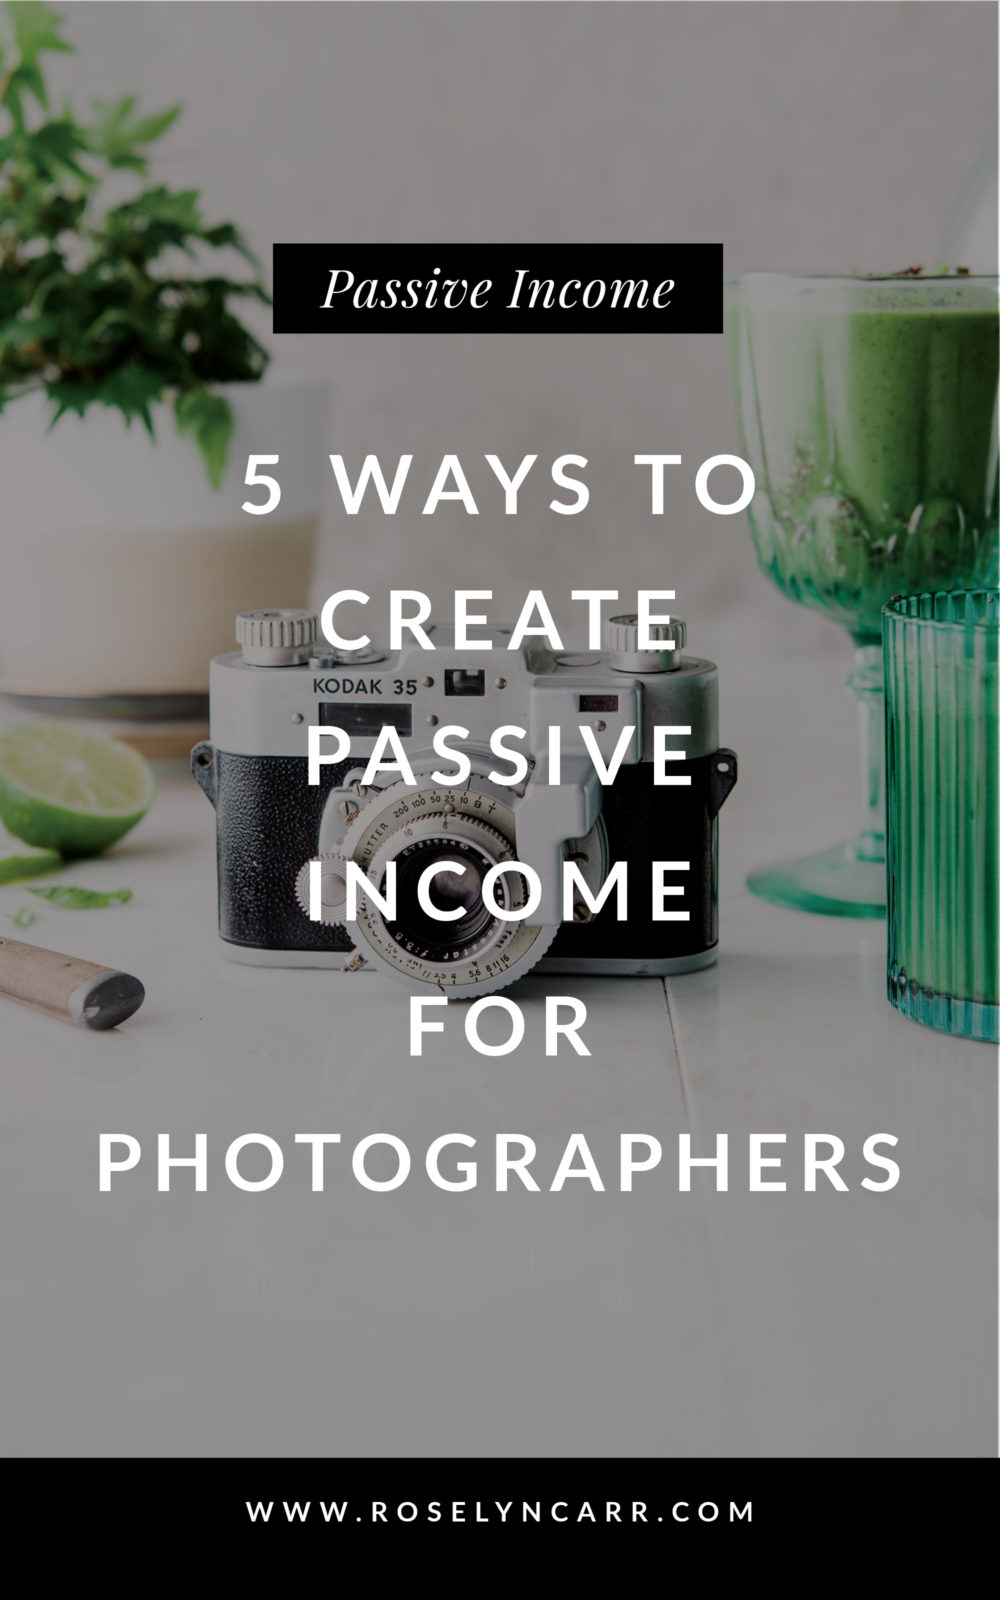 How to earn passive income as a photographer